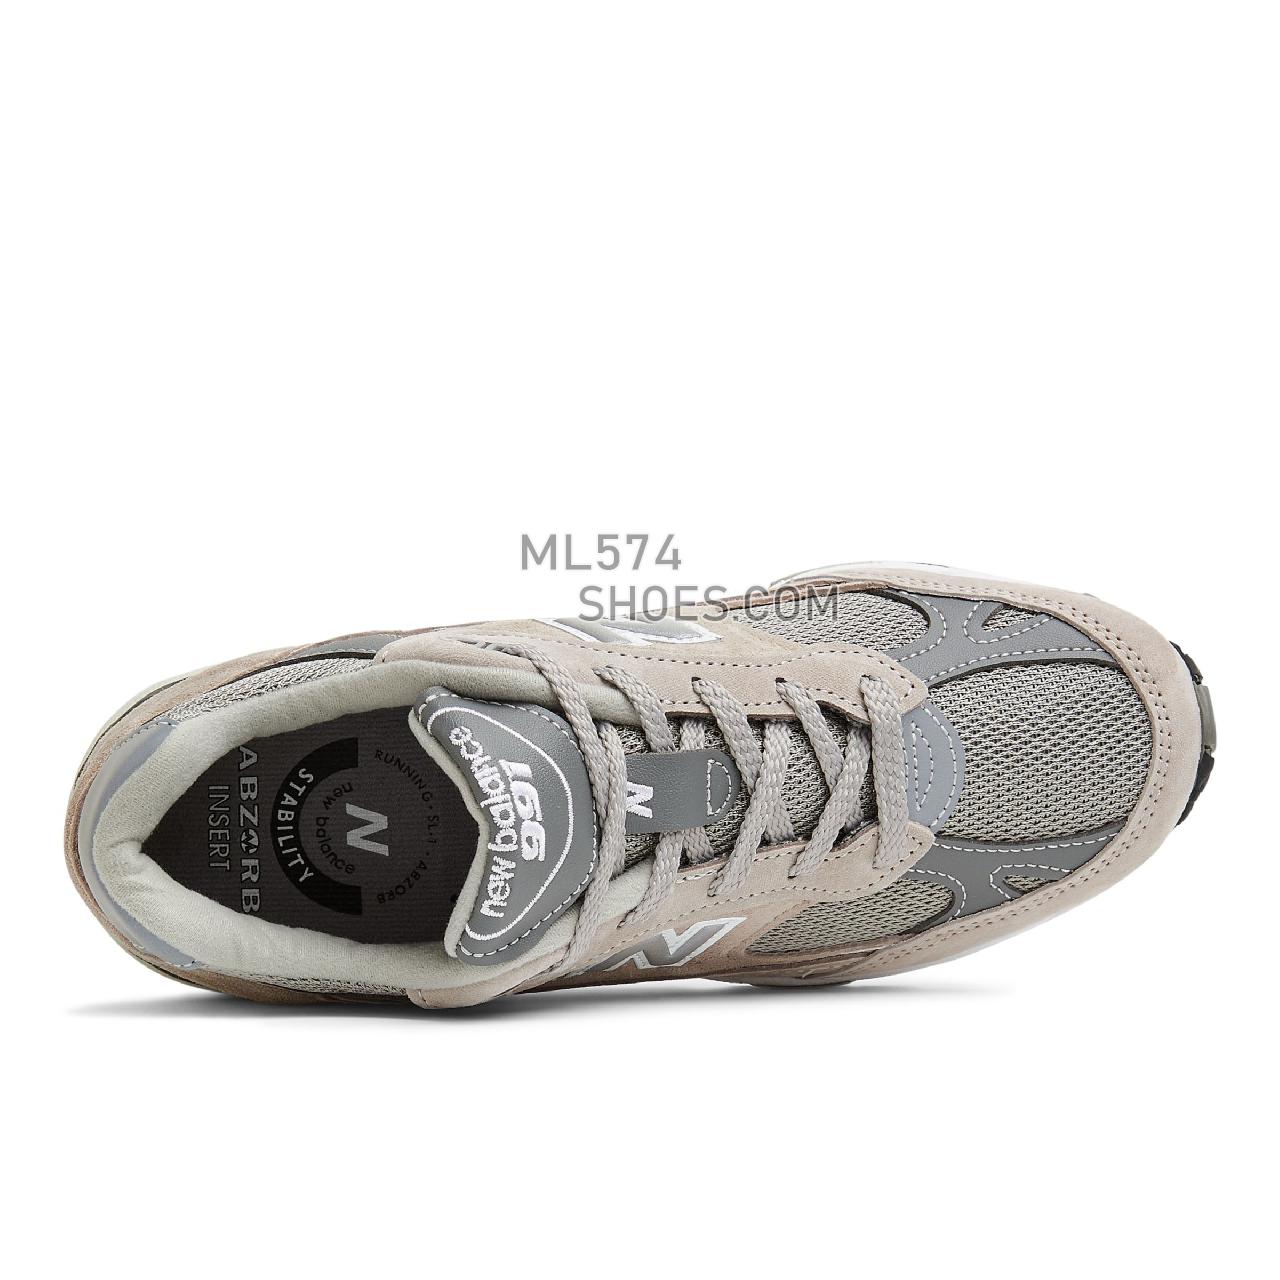 New Balance Made in UK 991 - Women's Classic Sneakers - Grey with White and Silver - W991GL